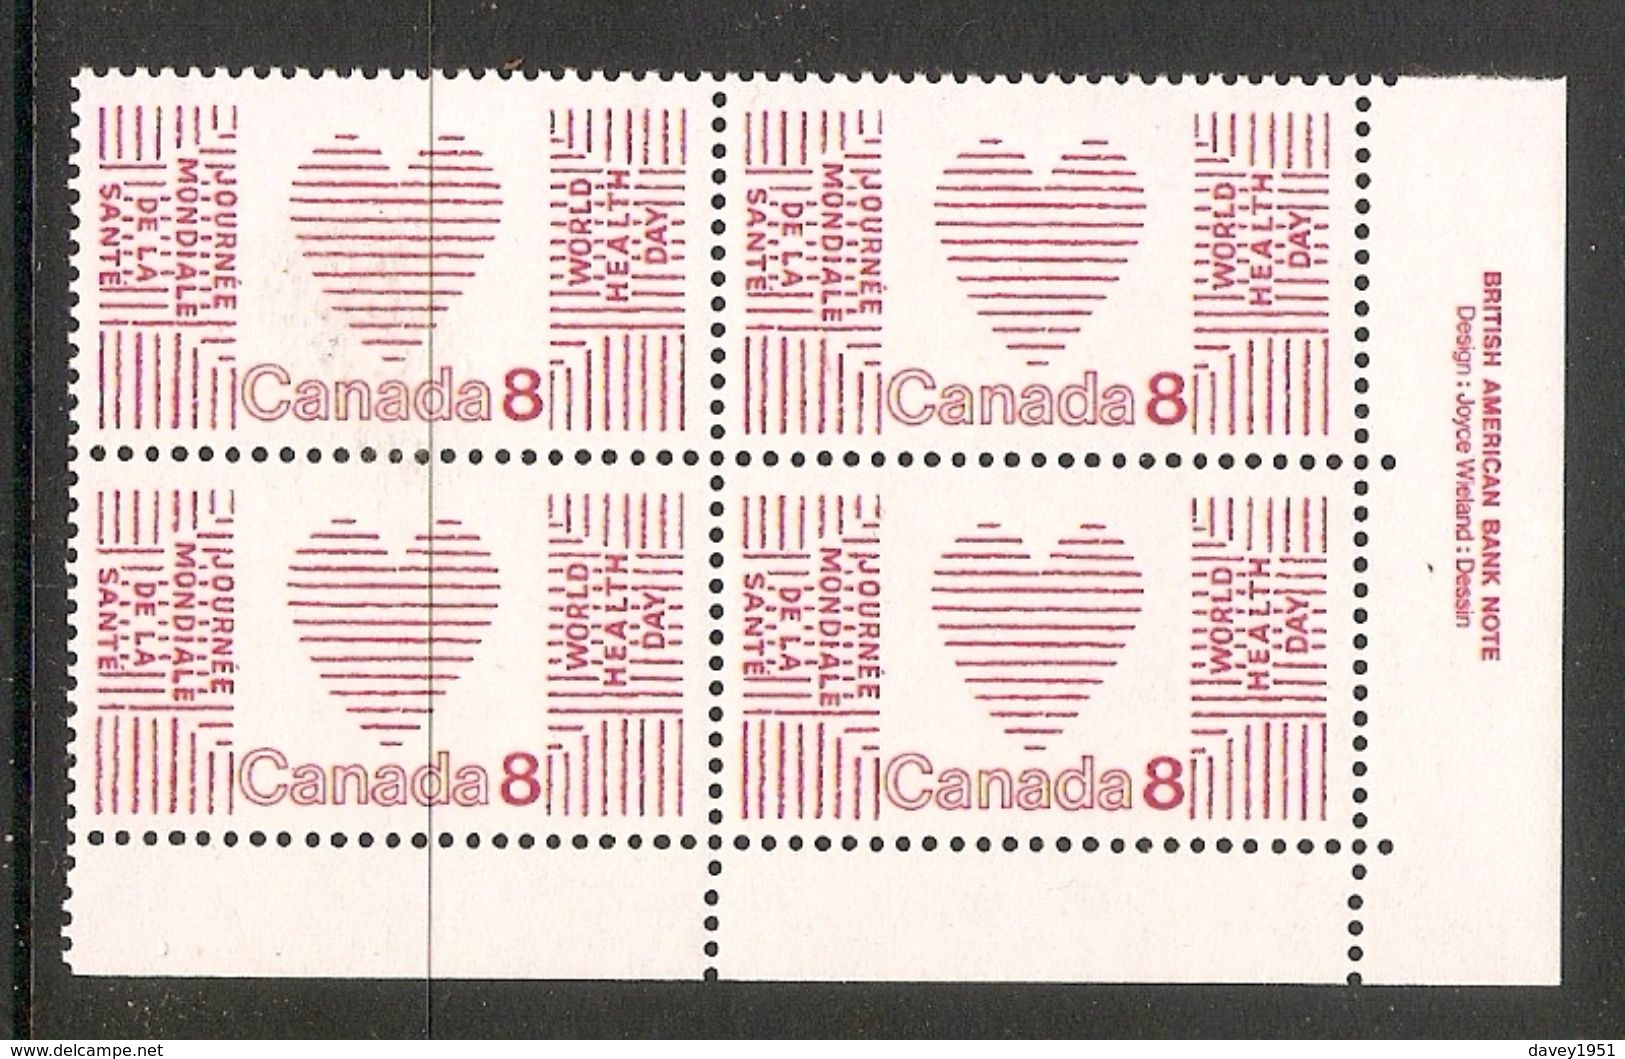 006327 Canada 1972 Health Day 8c Plate Block LR MNH - Plate Number & Inscriptions